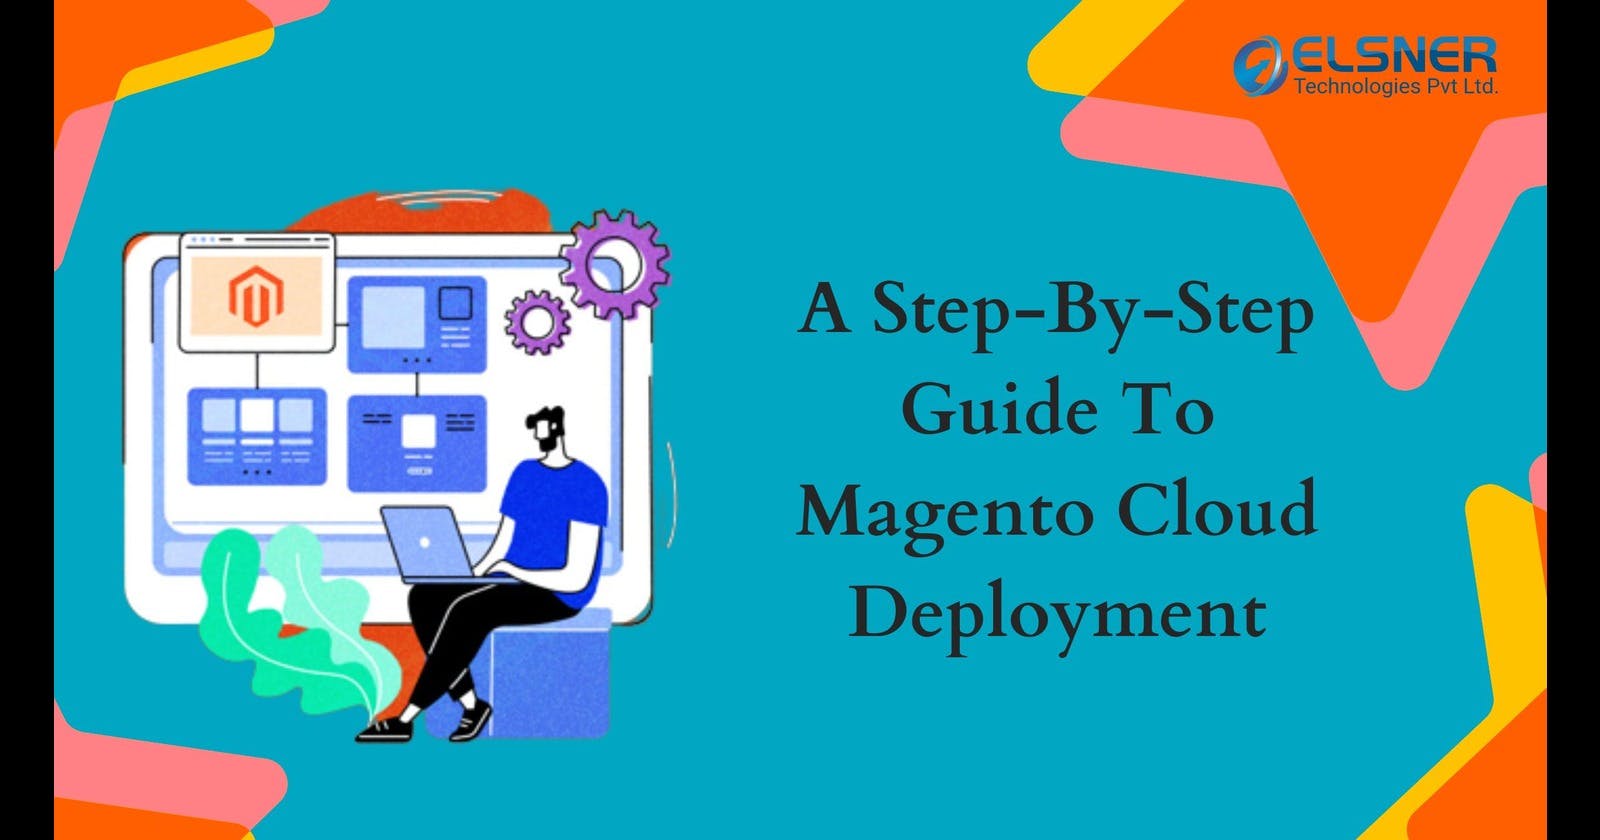 A Step-By-Step Guide To Magento Cloud Deployment